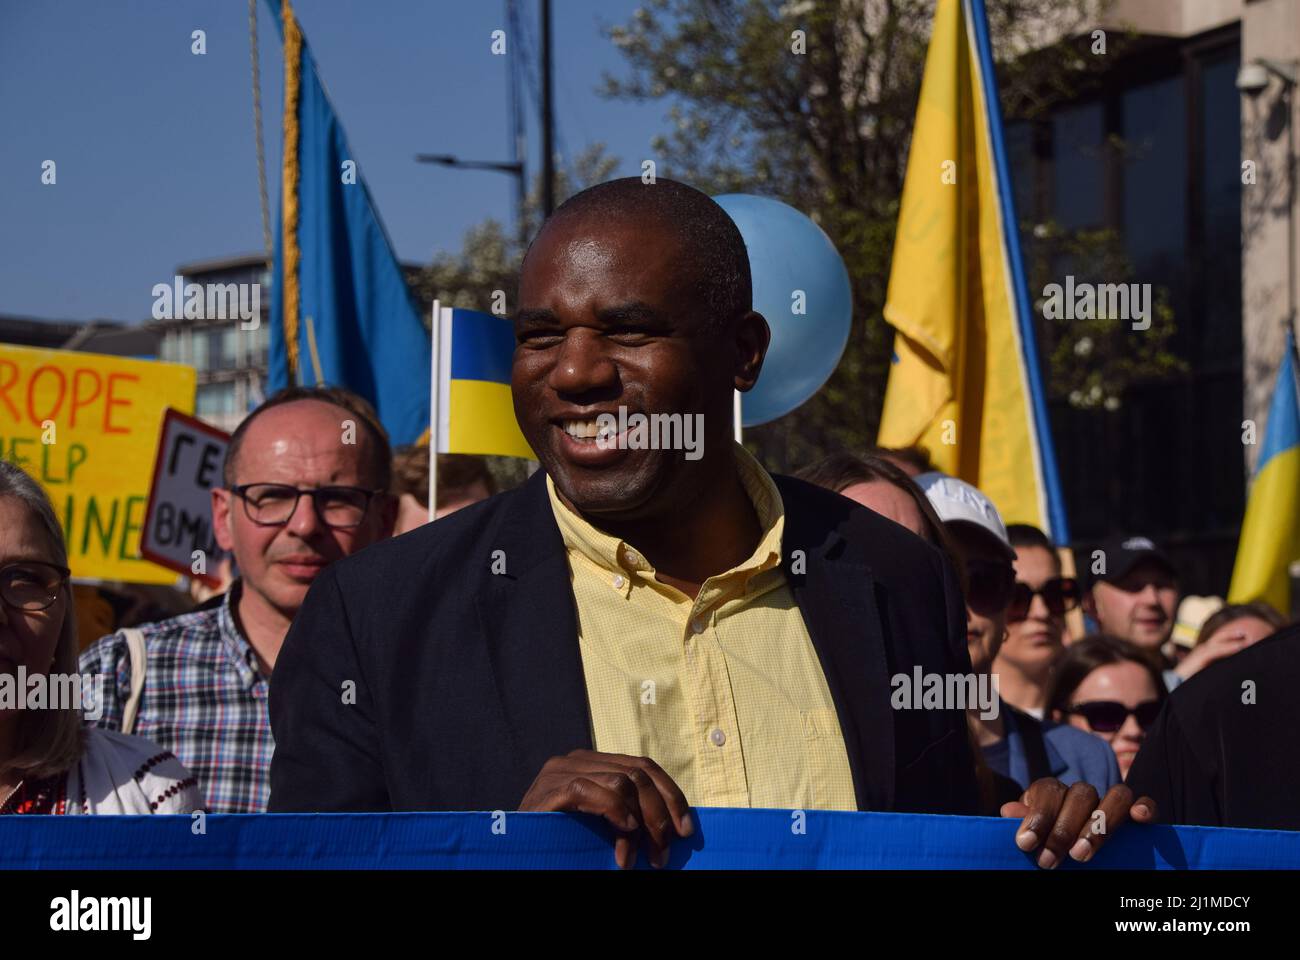 London, UK. 26th March 2022. Labour MP David Lammy with protesters in Park Lane during the London Stands With Ukraine march. Thousands of people marched from Park Lane to Trafalgar Square in solidarity with Ukraine as Russia continues its attack. Credit: Vuk Valcic/Alamy Live News Stock Photo